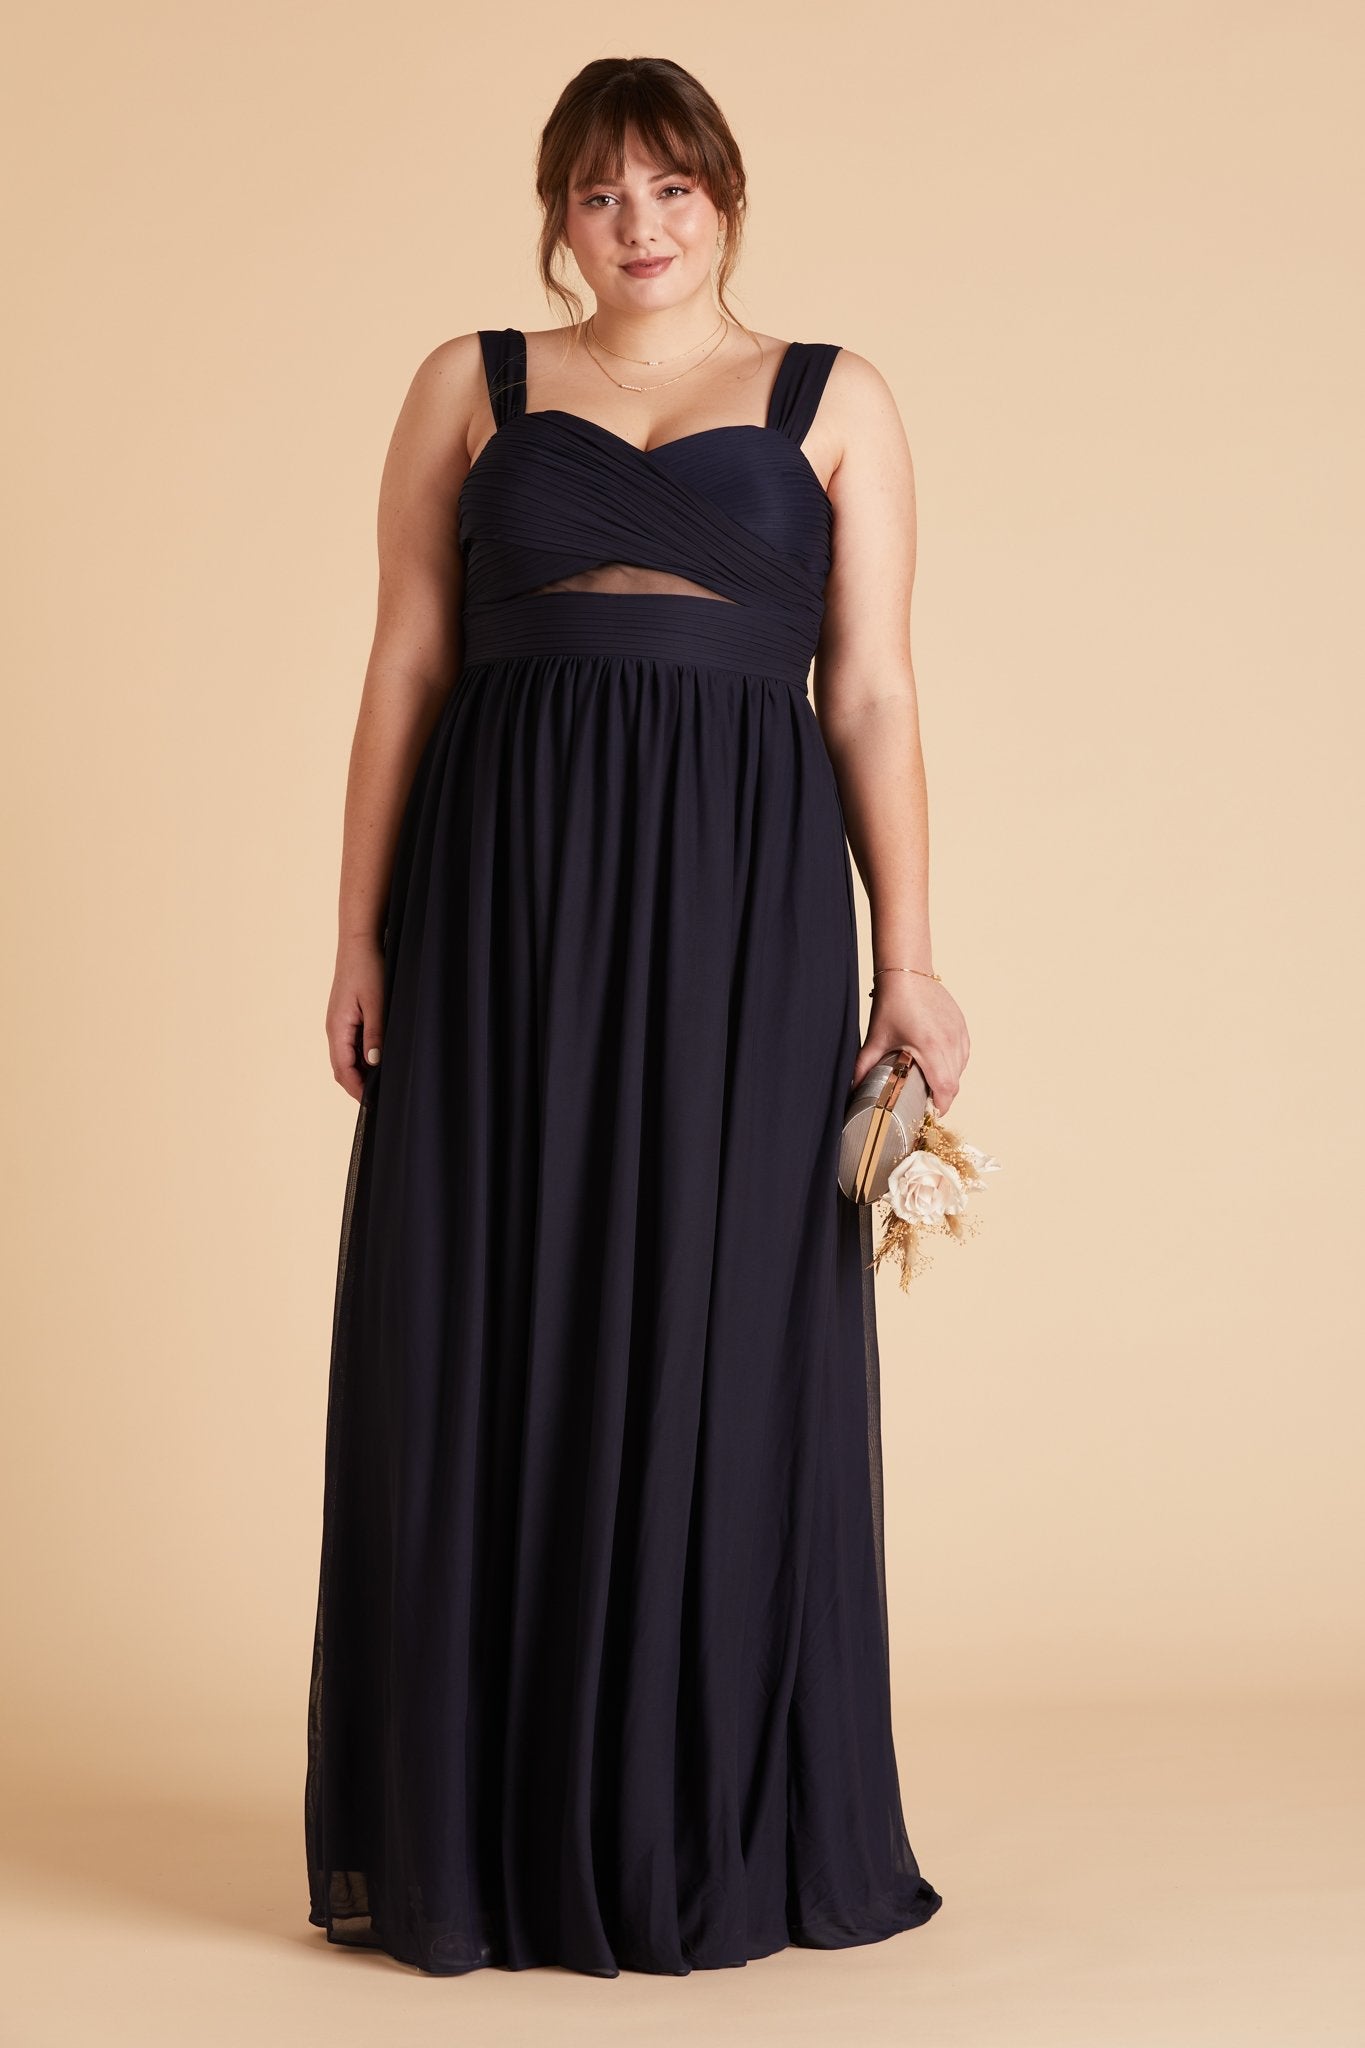 Elsye plus size bridesmaid dress in navy blue chiffon by Birdy Grey, front view